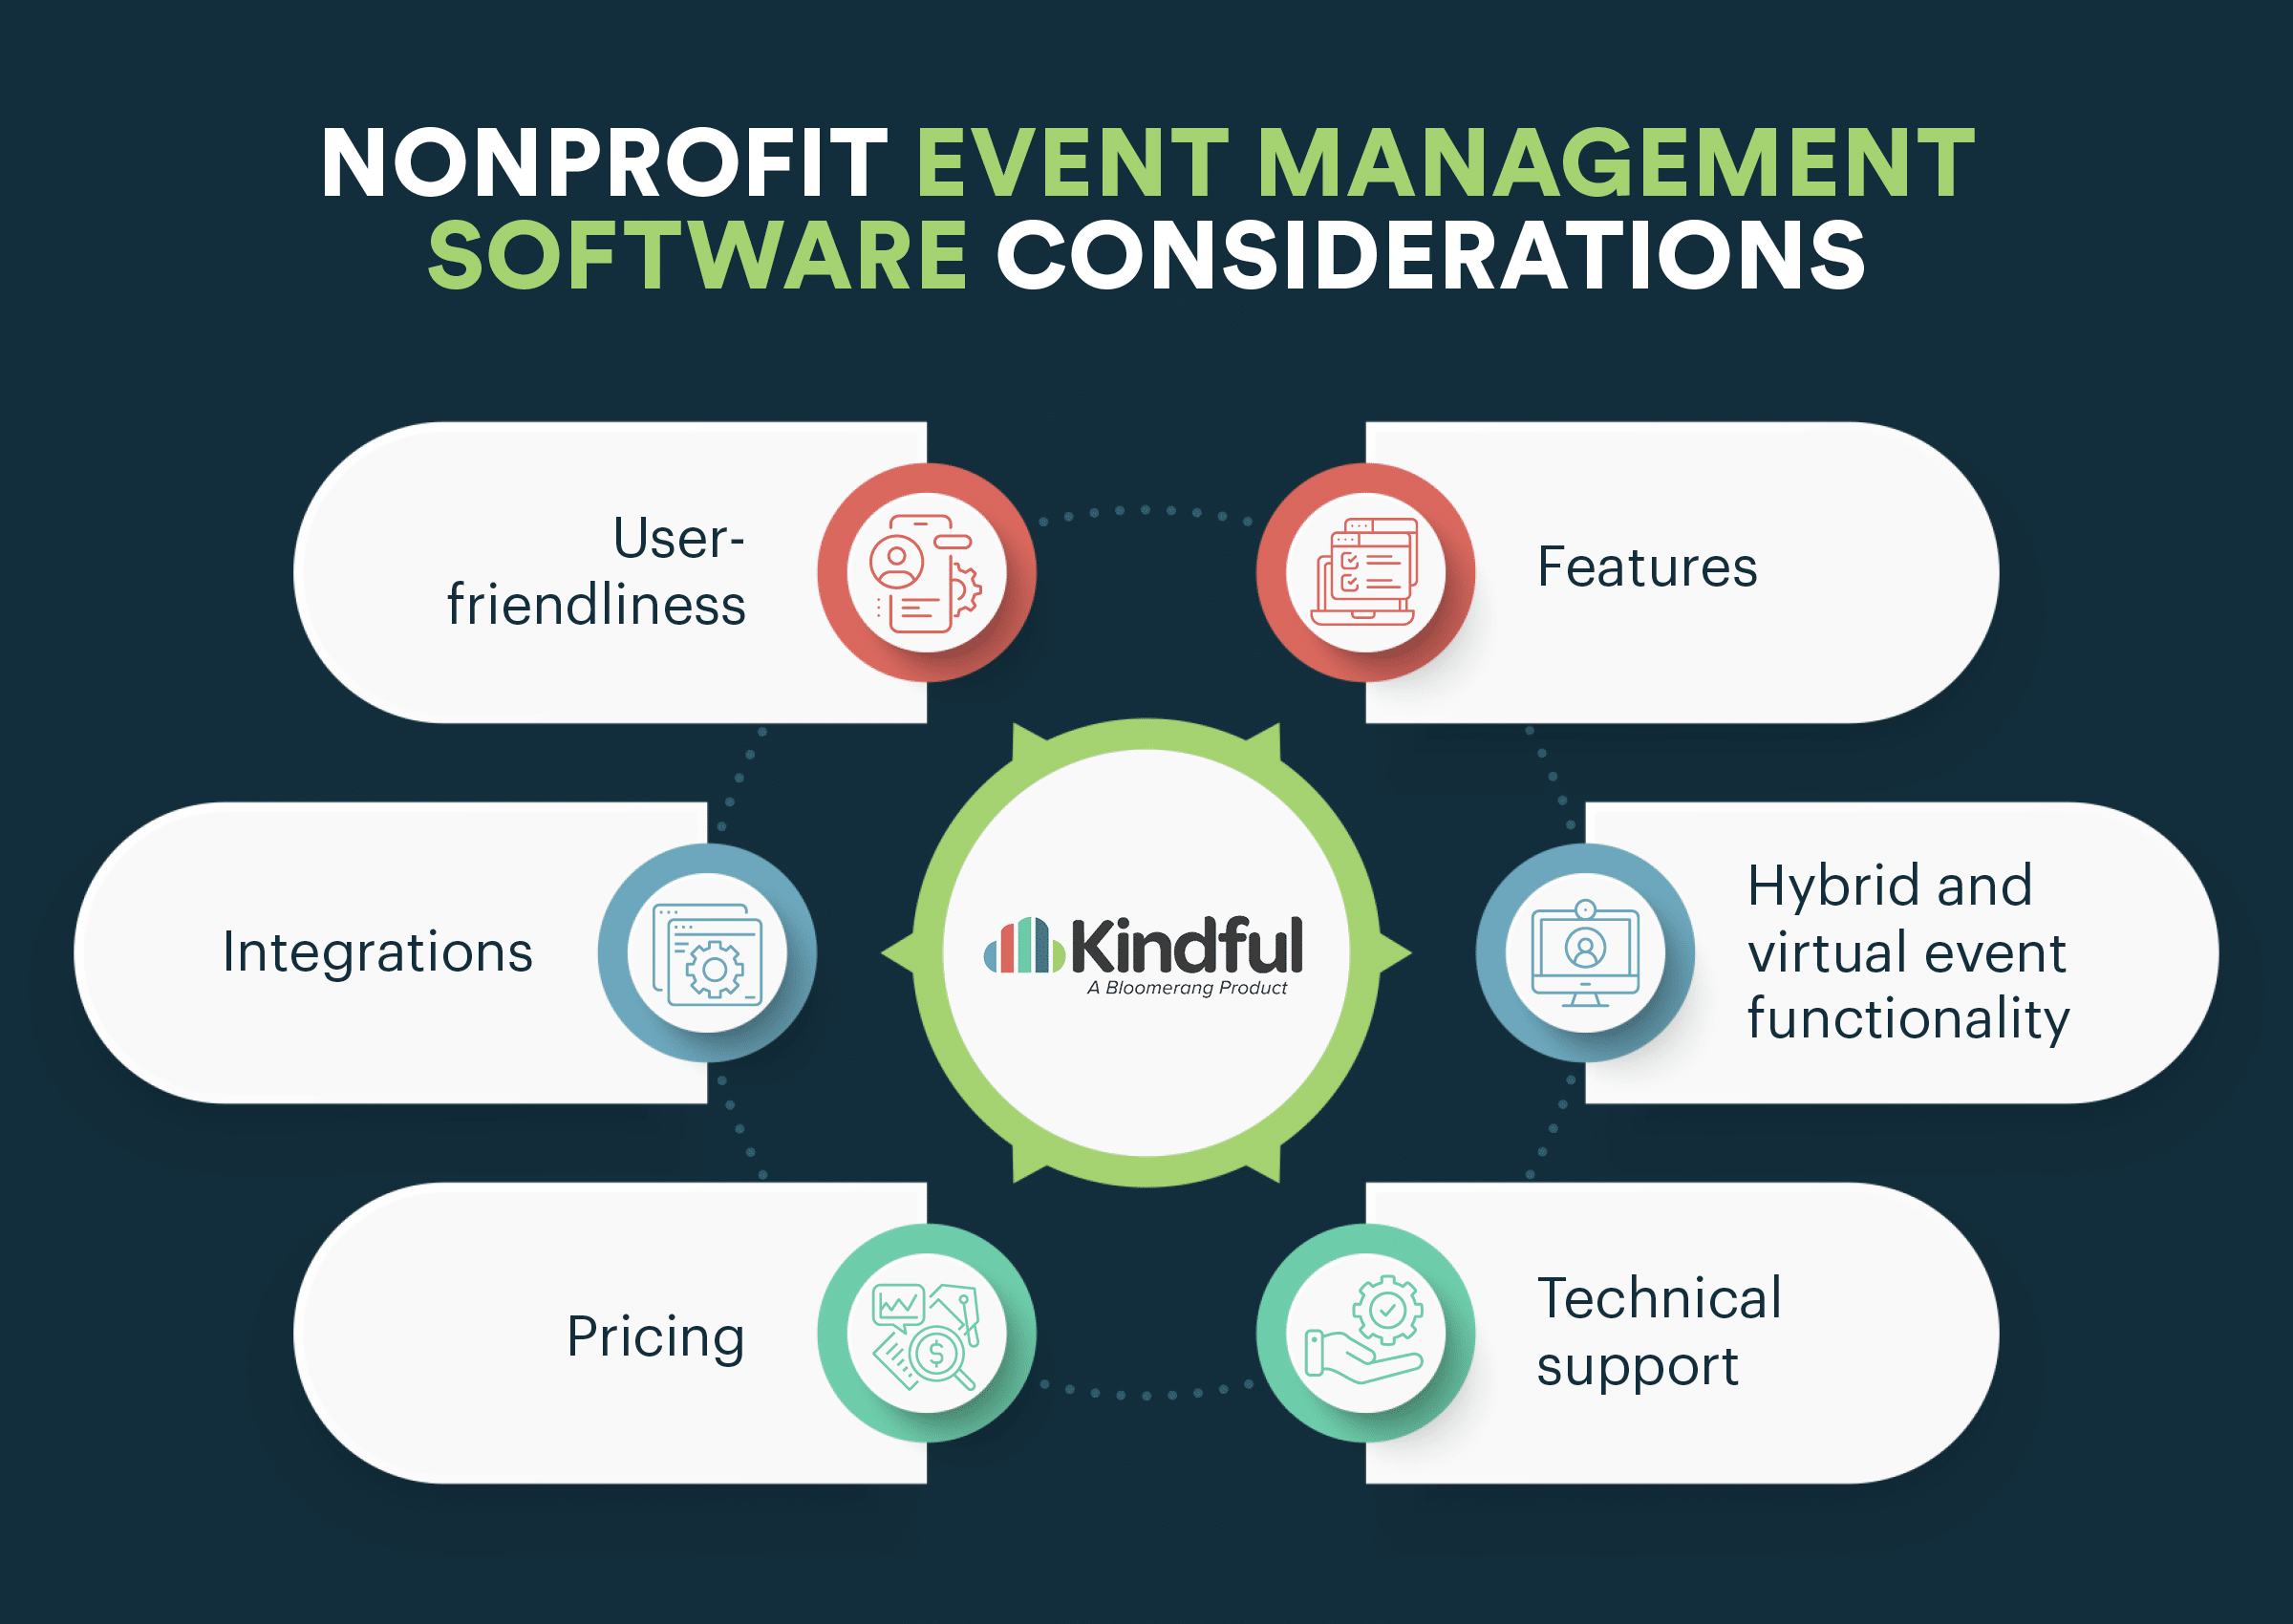 Nonprofit event management software considerations (explained in the sections below)